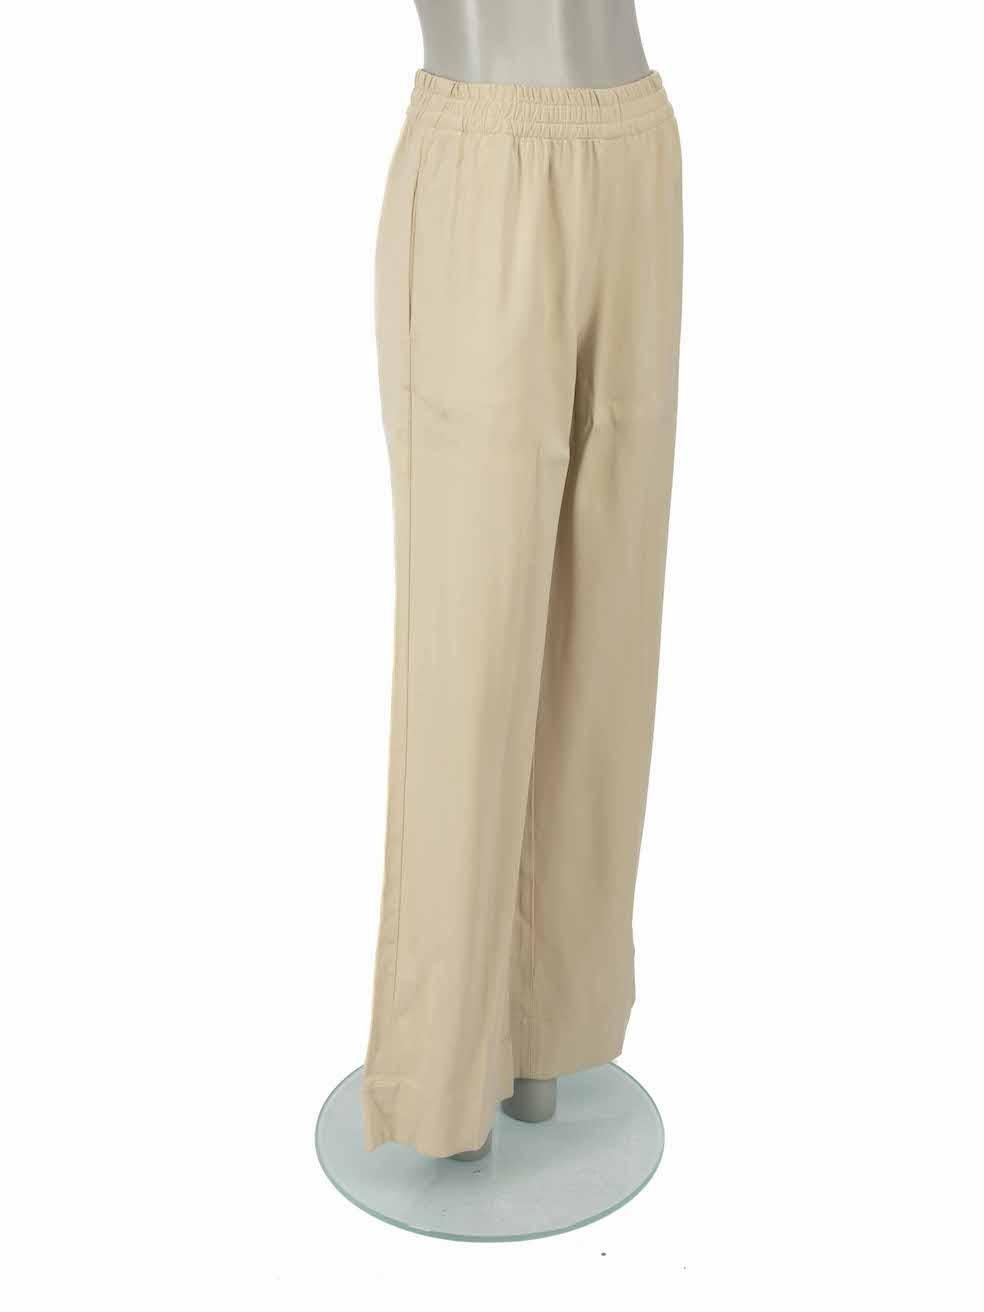 CONDITION is Very good. Minimal wear to trousers is evident. Minimal wear to the front of the left leg with light marks and a pluck to the weave on this used Golden Goose designer resale item.
 
Details
Beige
Viscose
Trousers 
Straight